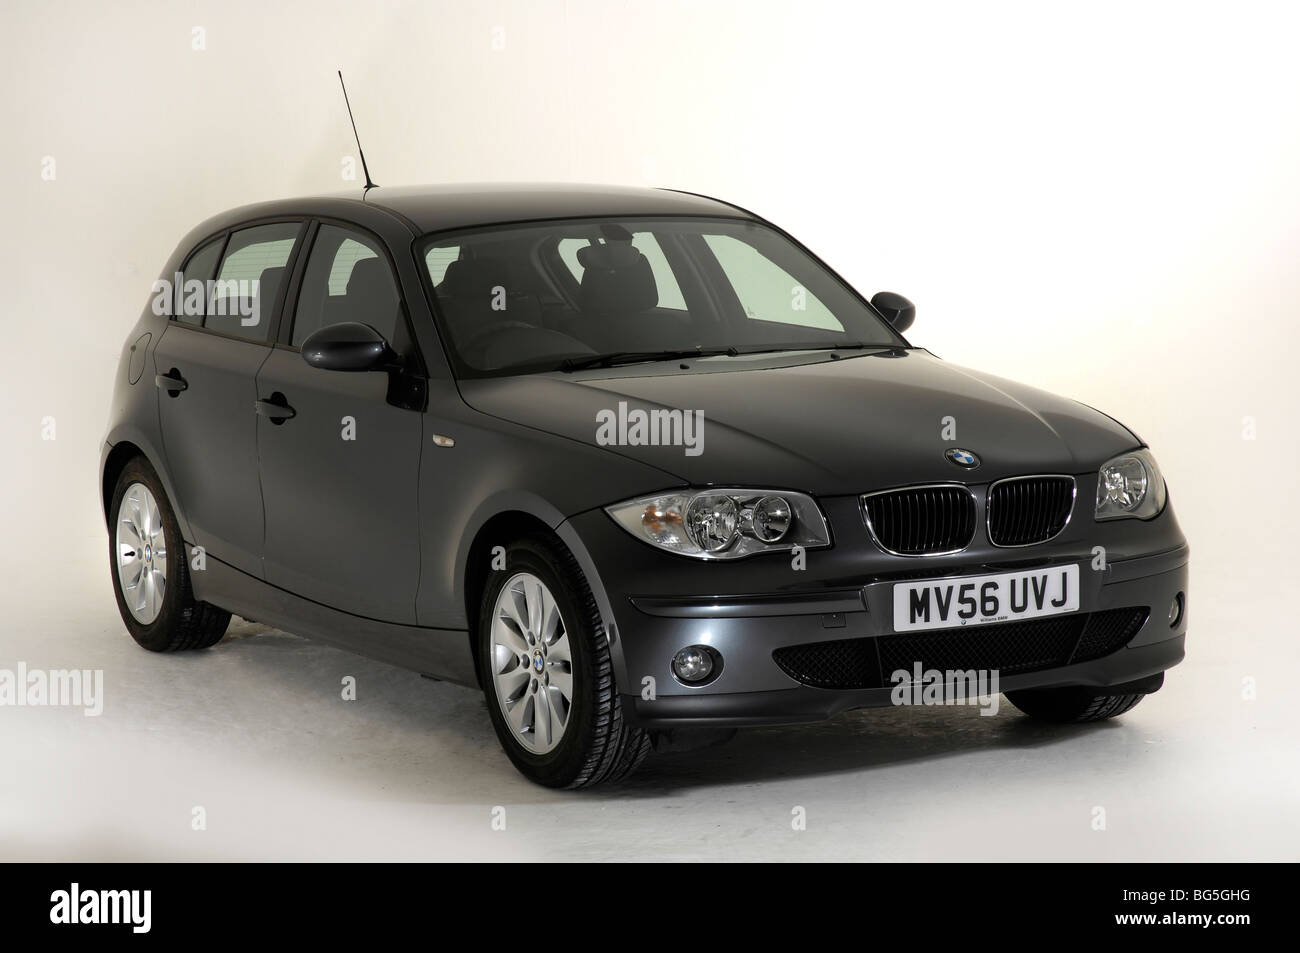 Bmw 116i High Resolution Stock Photography And Images Alamy